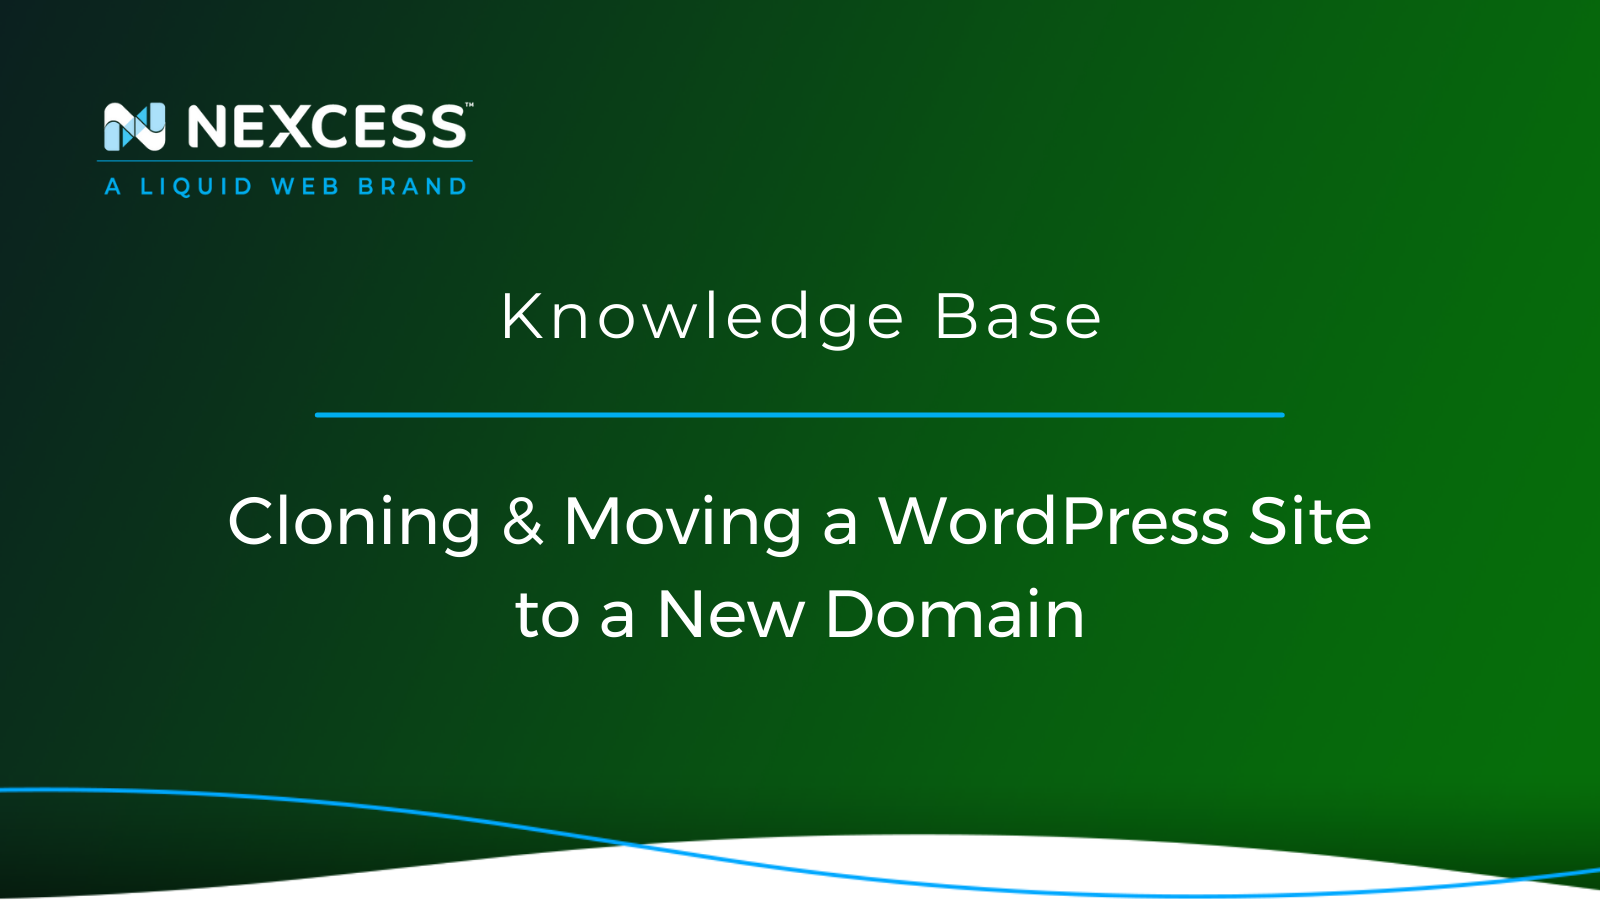 Cloning & Moving a WordPress Site to a New Domain